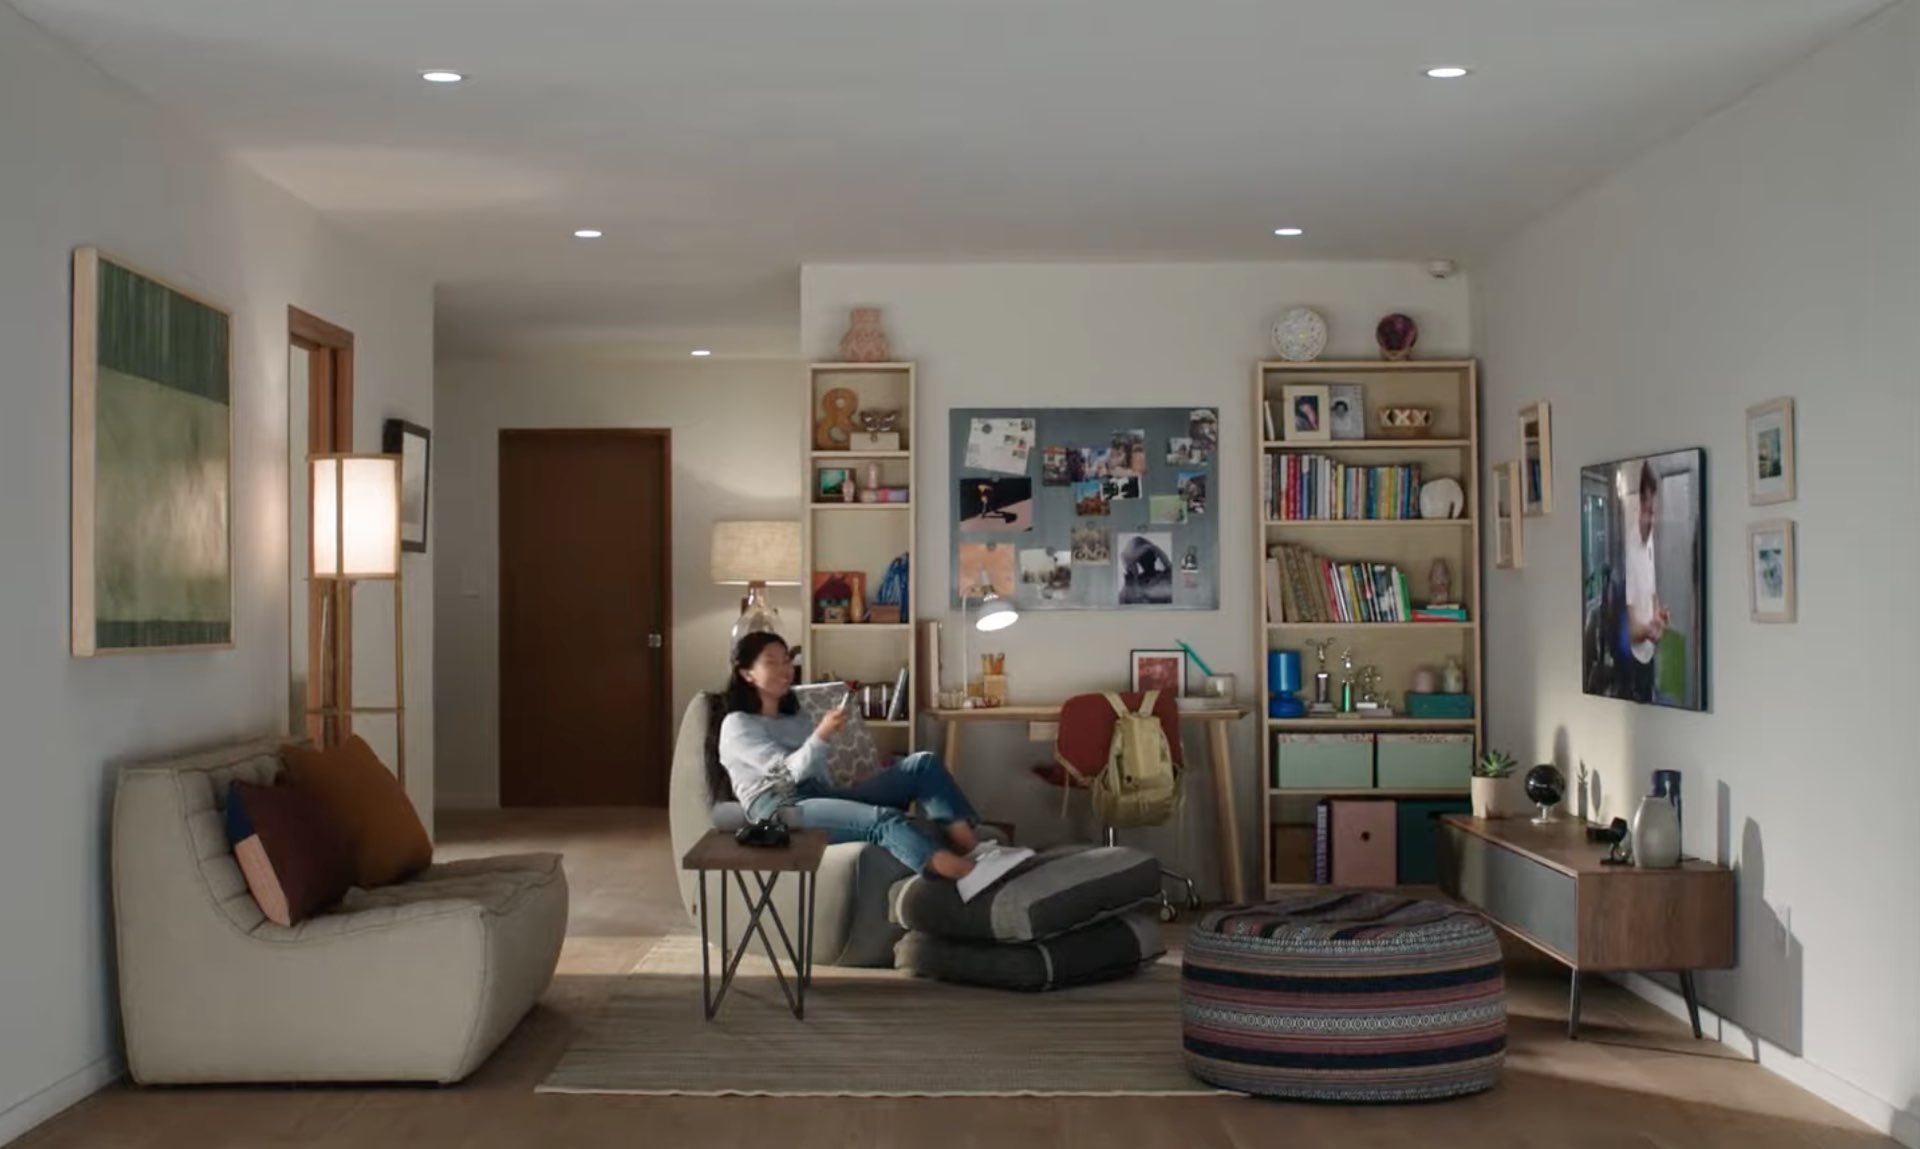 A lifestyle image showing a home featuring a young woman sitting on the couch, smiling and watching Apple TV and holding Siri Remote in her right hand